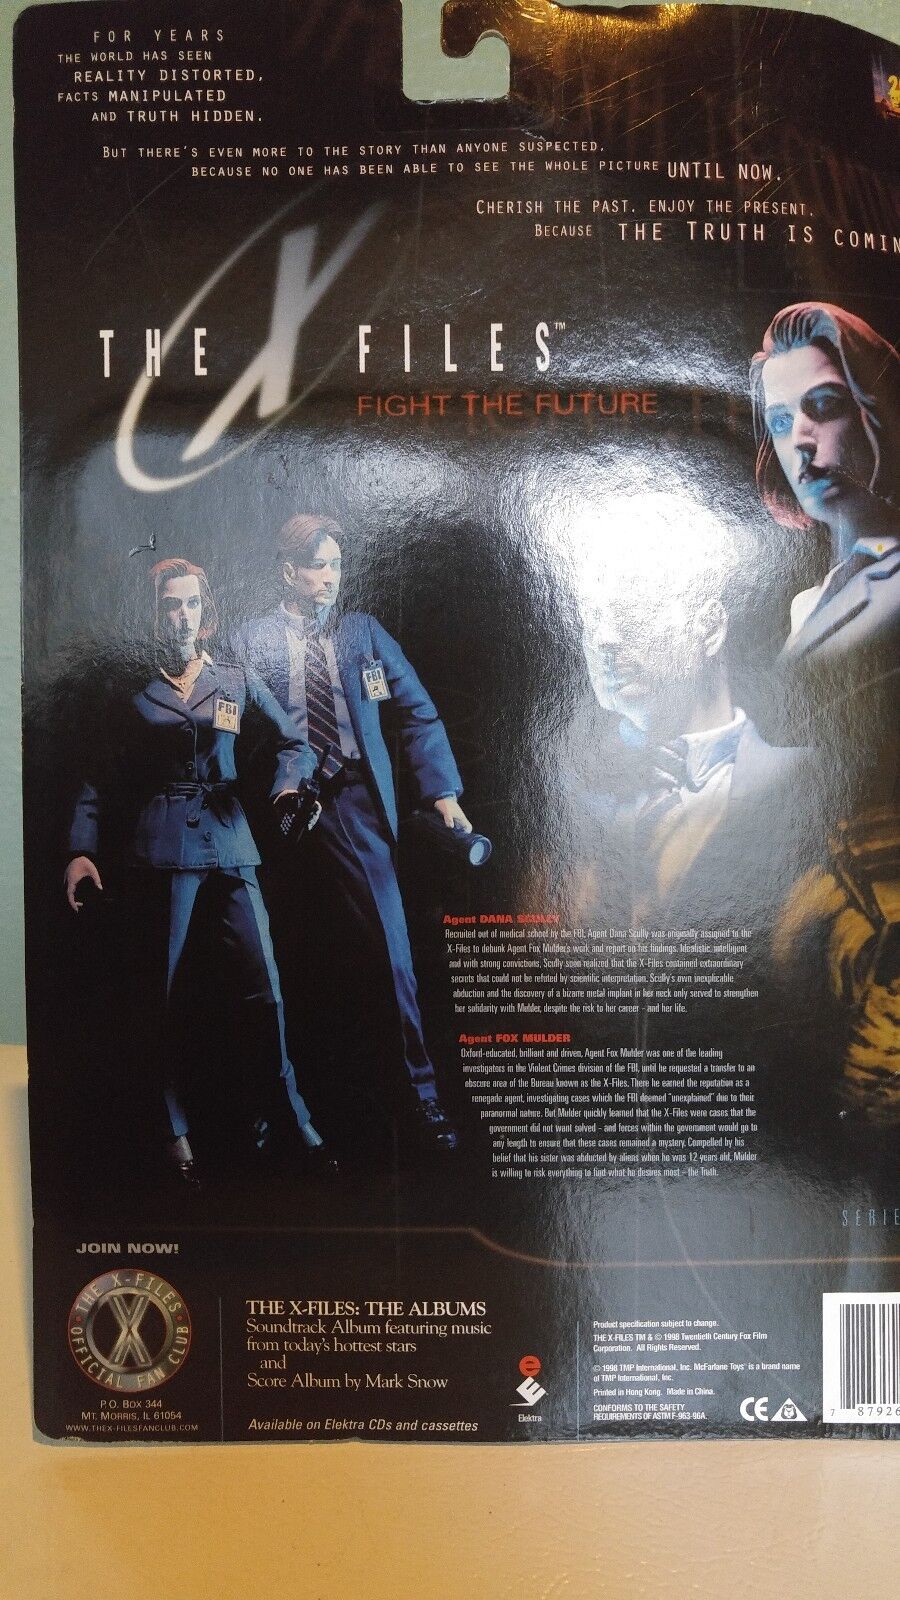 1998 McFarlane Toys The X-Files Series 1 Agent Fox Mulder and Agent Dana Scully Без бренда - фотография #9